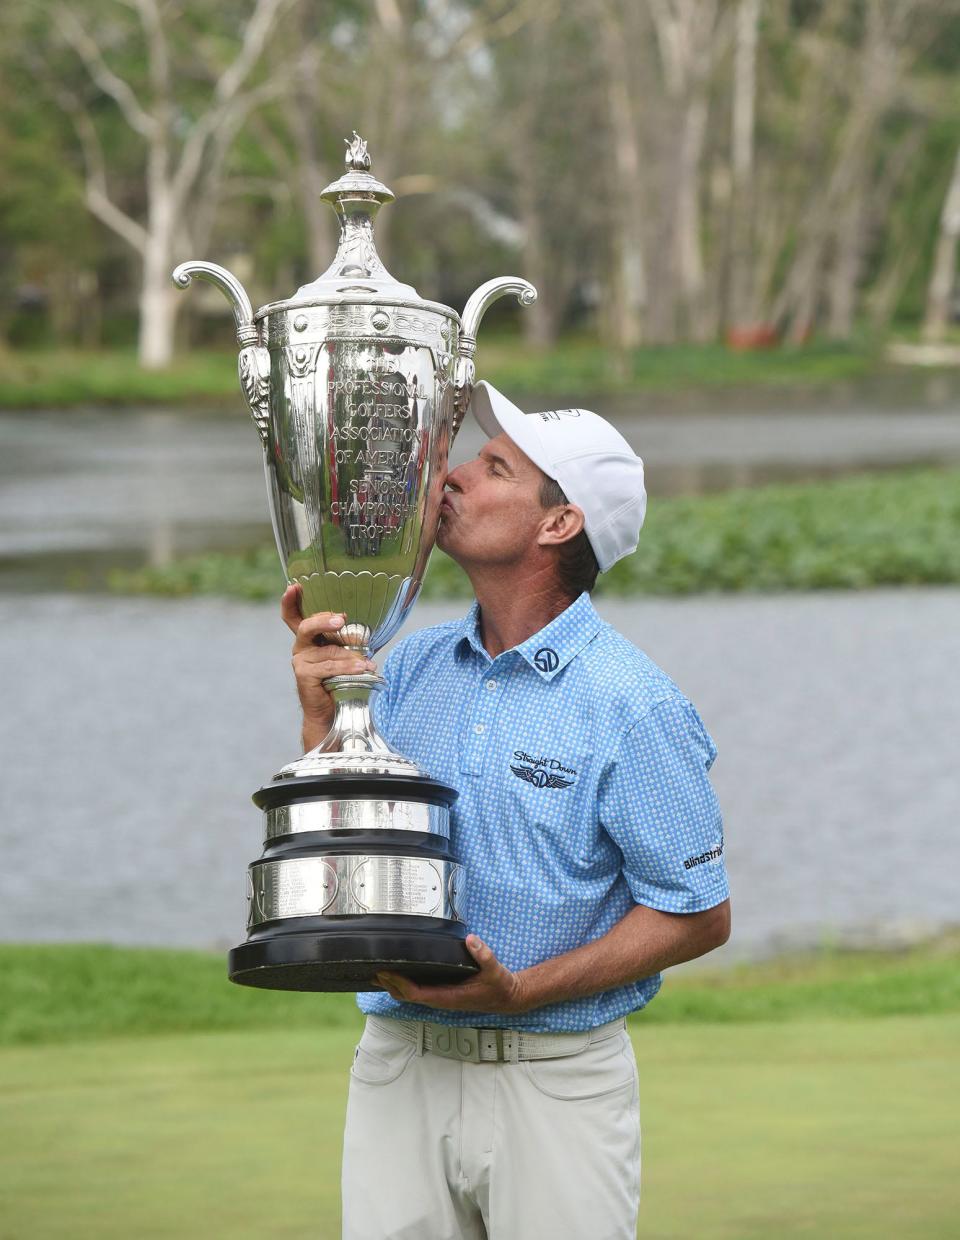 Steven Alker kisses the Alfred S. Bourne Trophy, Sunday, May 29, 2022, after winning the Senior PGA Championship golf tournament at Harbor Shores in Benton Harbor, Mich. (Don Campbell/The Herald-Palladium via AP)